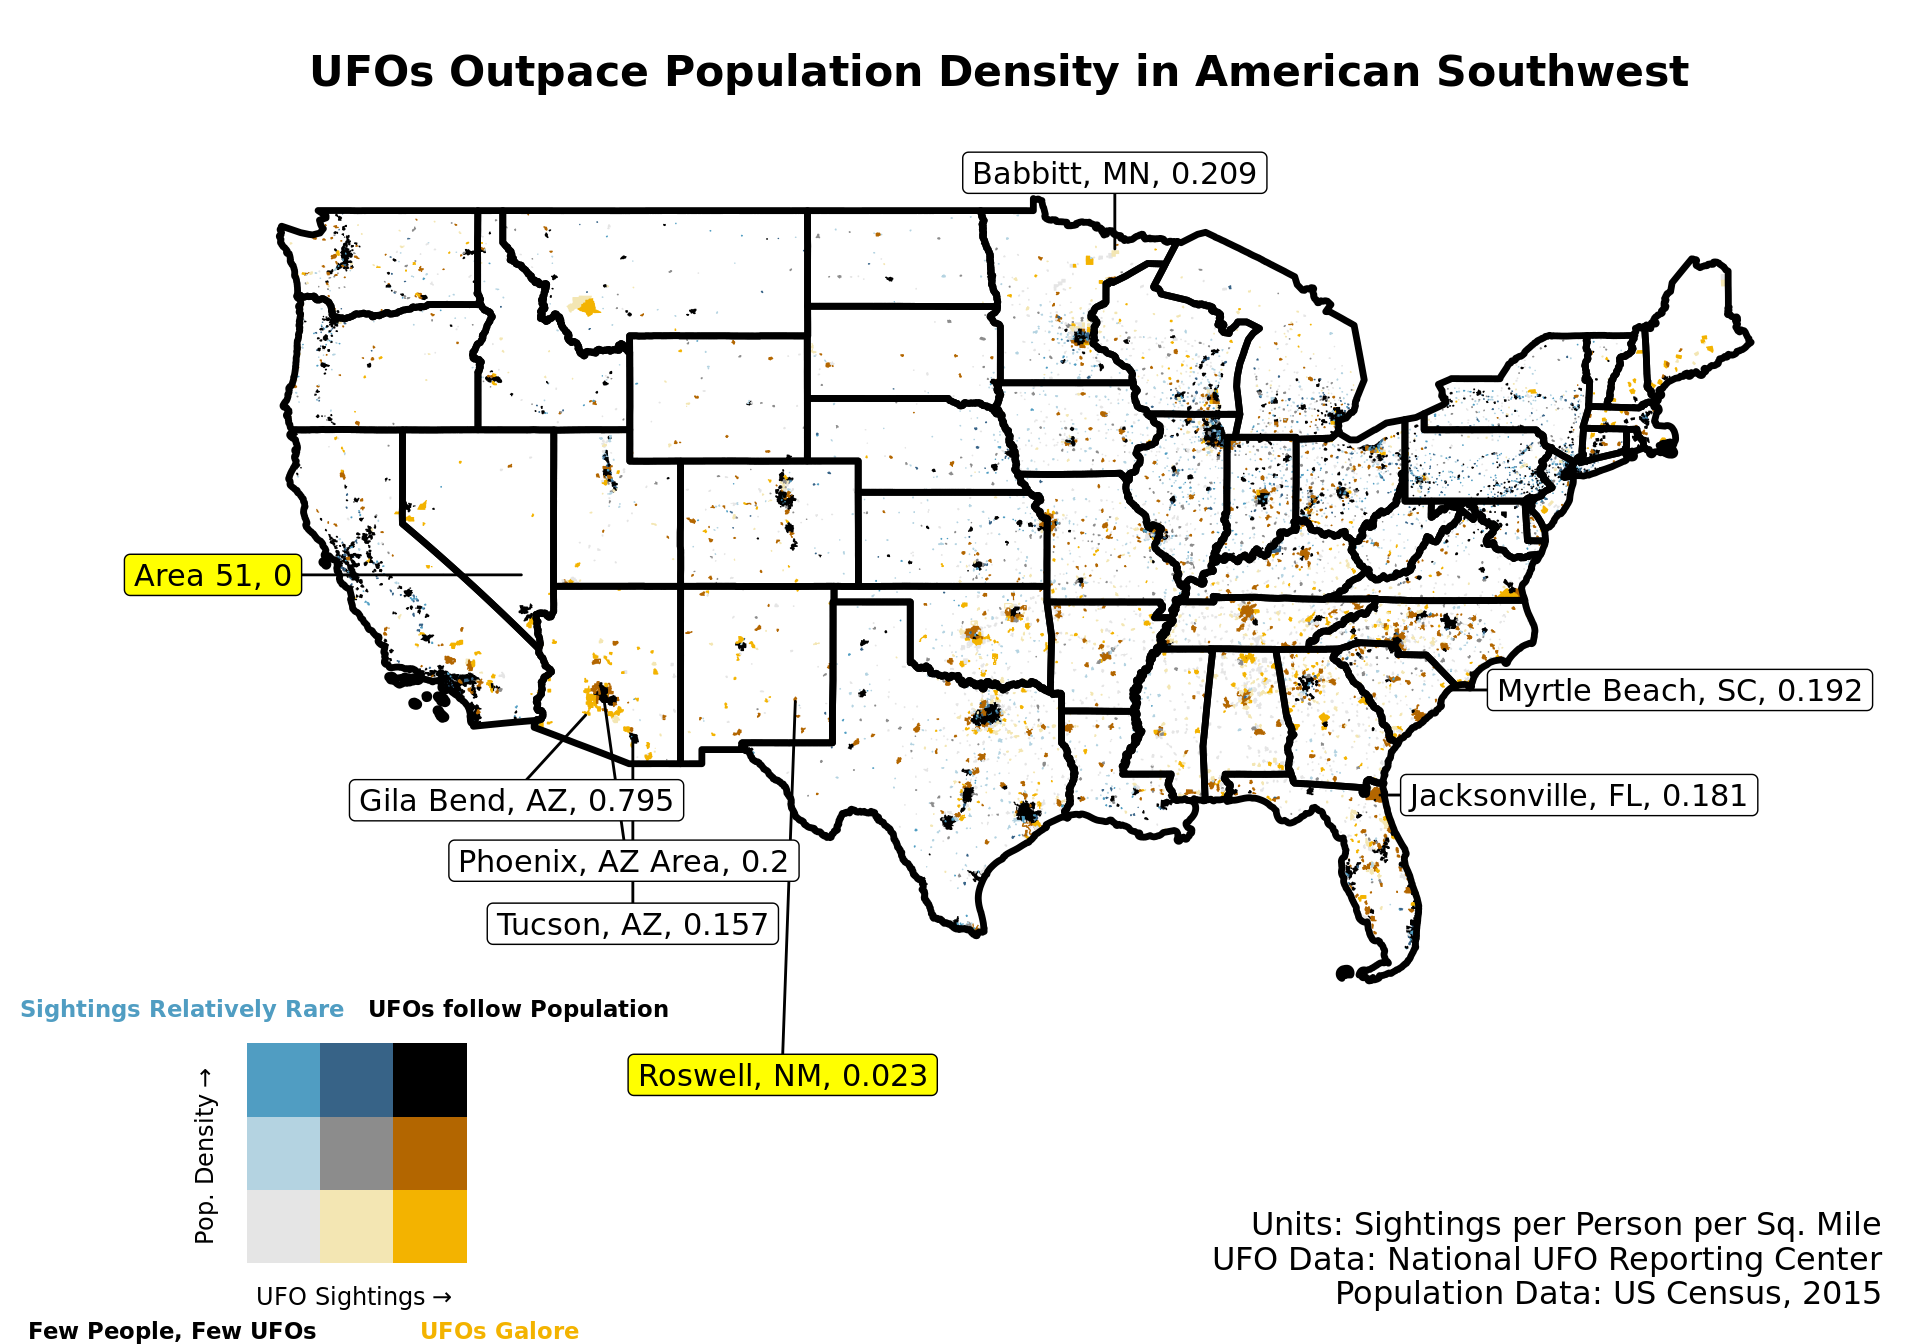 UFO sightings relative to population density in the United States